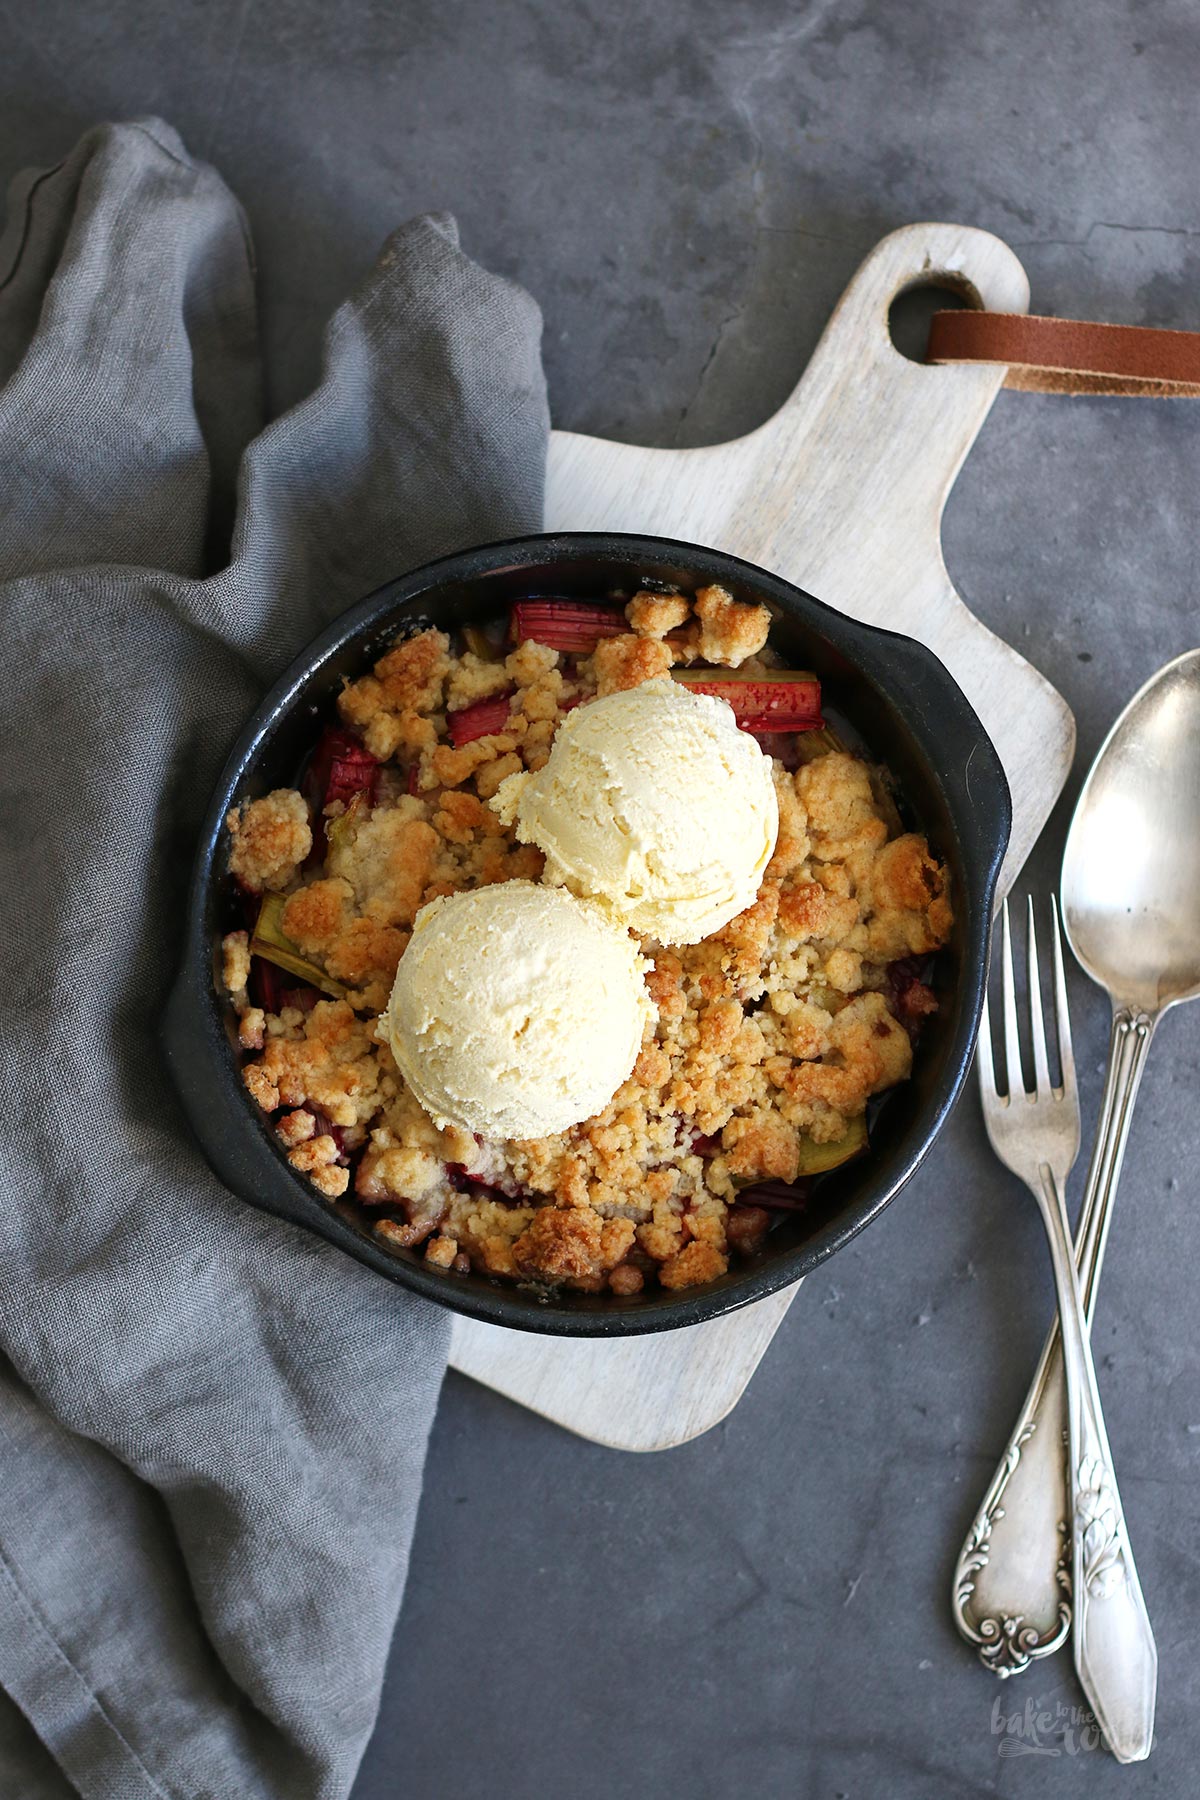 Rhubarb Crumble with Candied Ginger | Bake to the roots